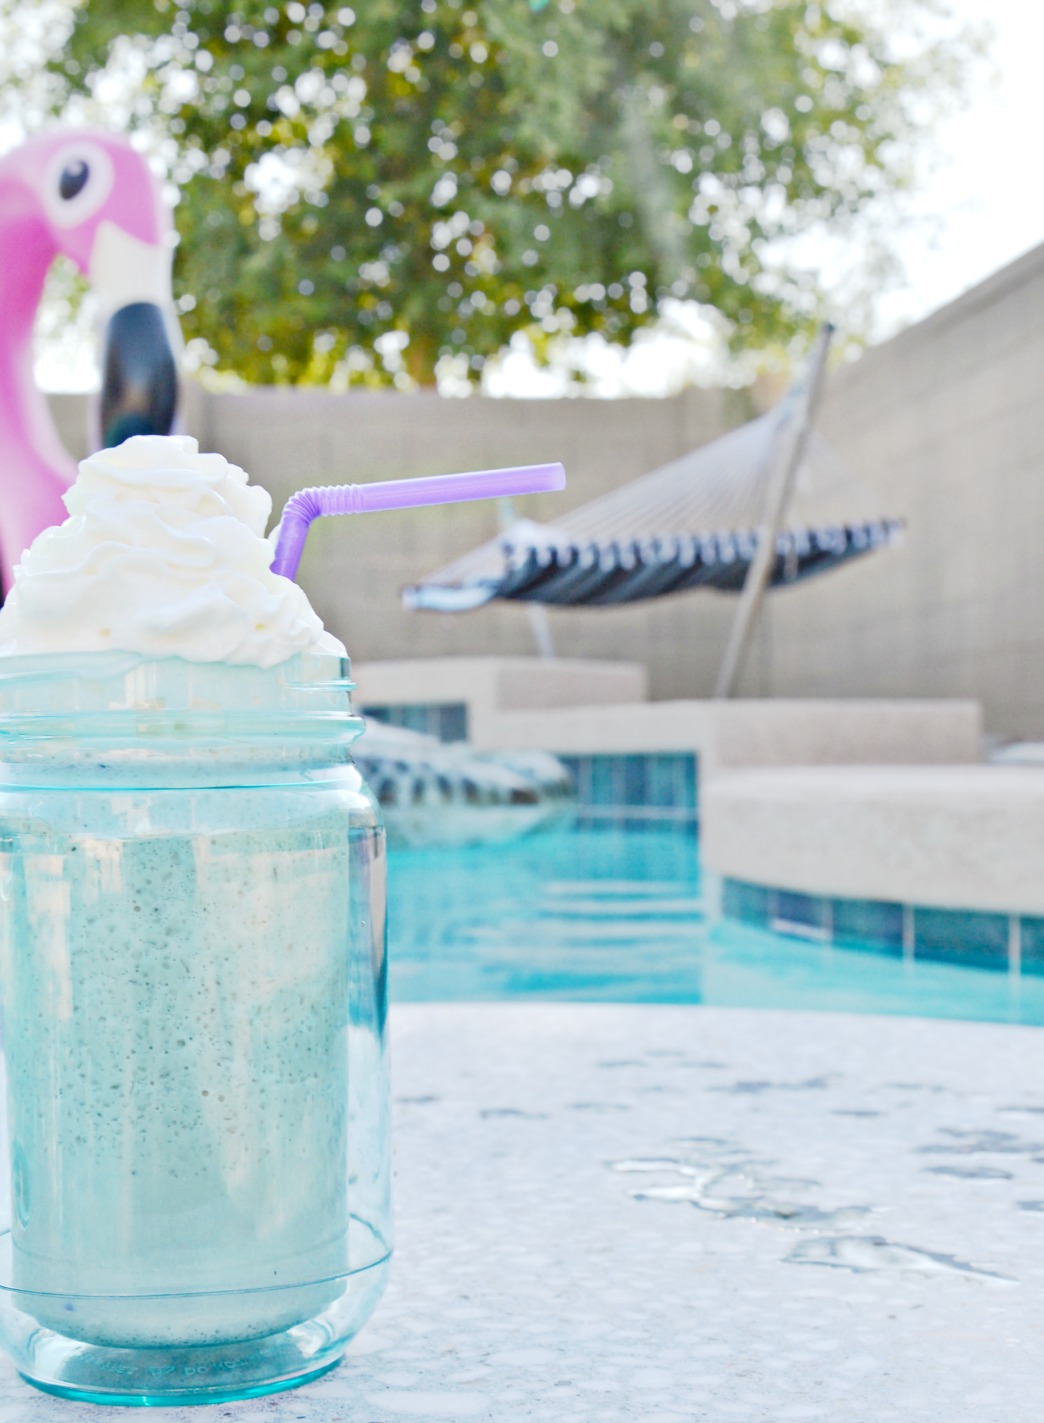 This easy french vanilla frappe recipe is a great summer poolside coffee drink with just four ingredients. Make it at your next pool party!